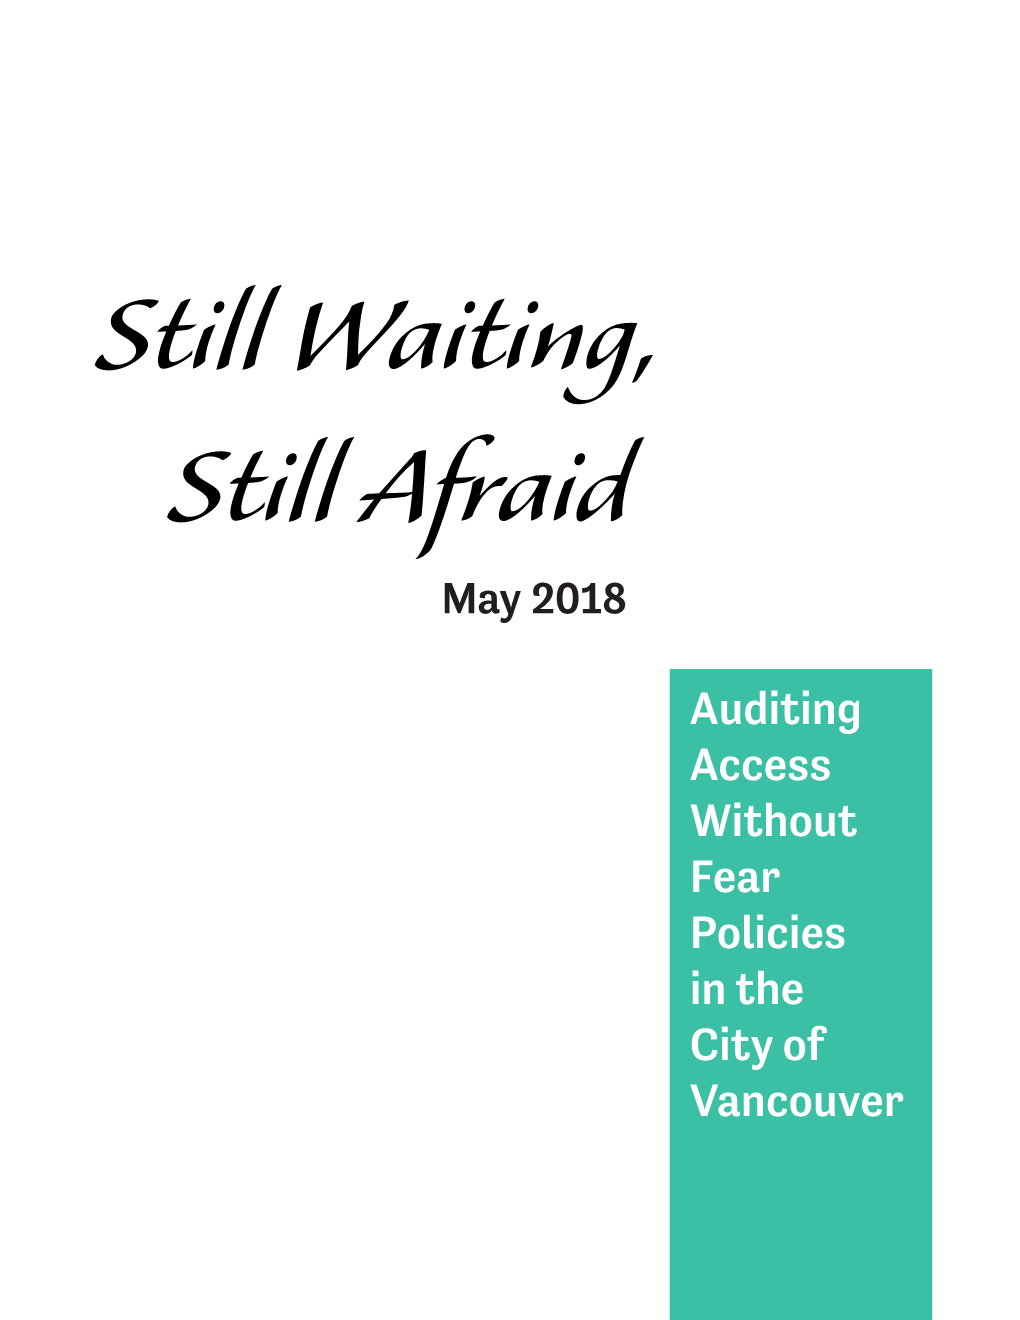 Auditing Access Without Fear Policies in the City of Vancouver